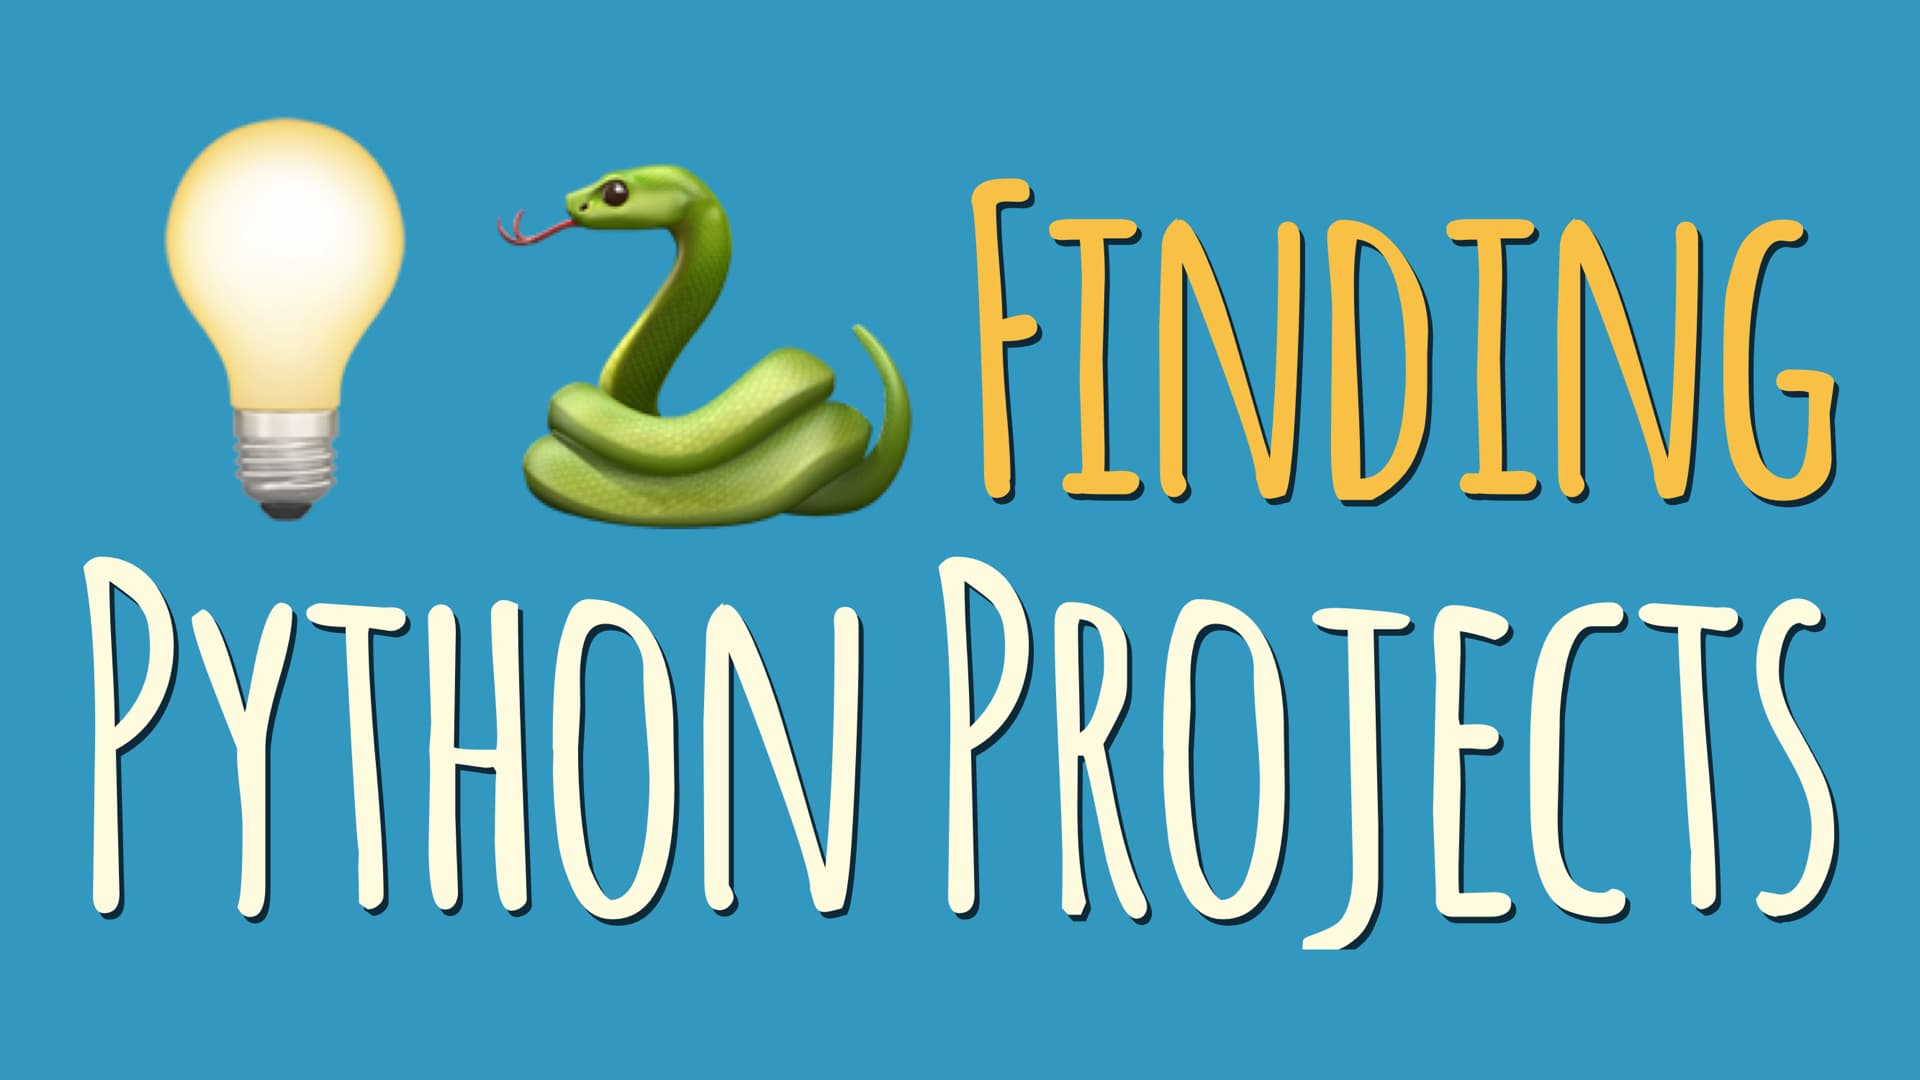 Finding Python Projects